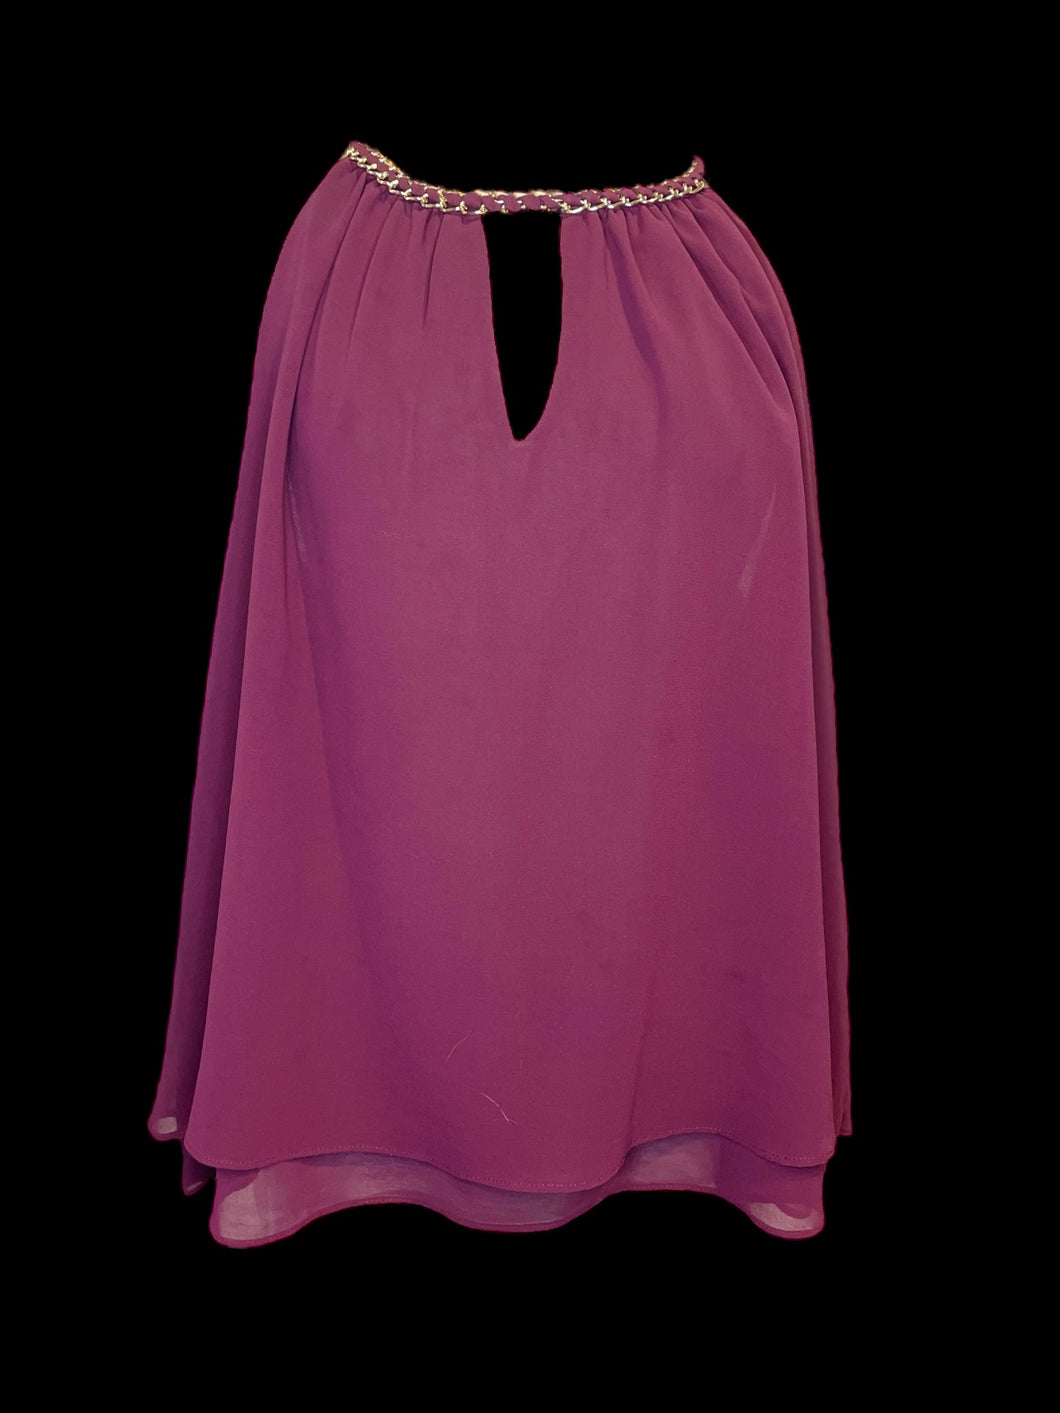 4X Plum sheer sleeveless scoop neck tiered top w/ gold-like chain detail, & keyhole accents